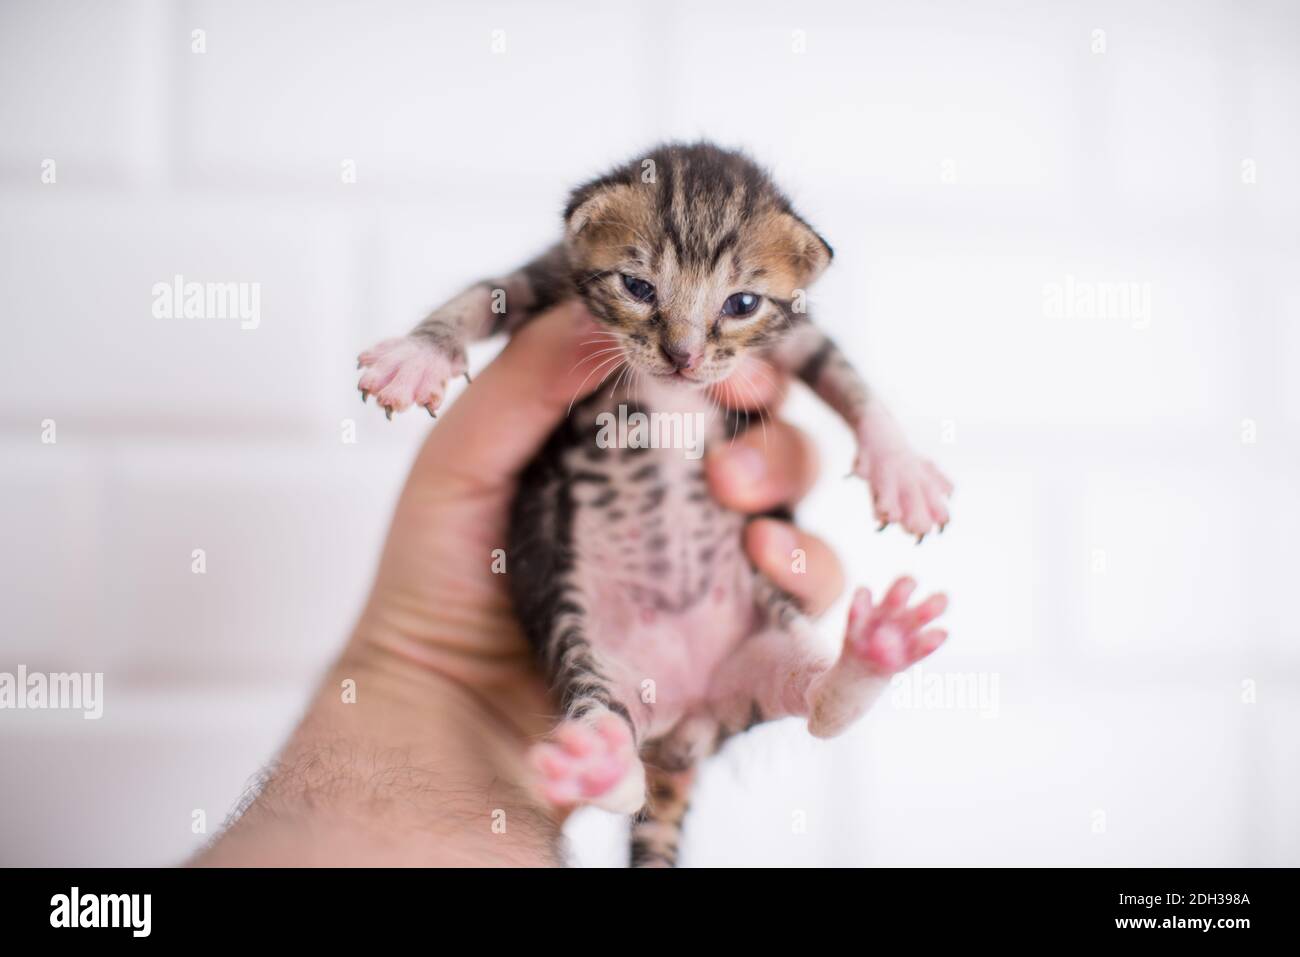 2 weeks old baby kitten in hand on an isolated white background Stock Photo